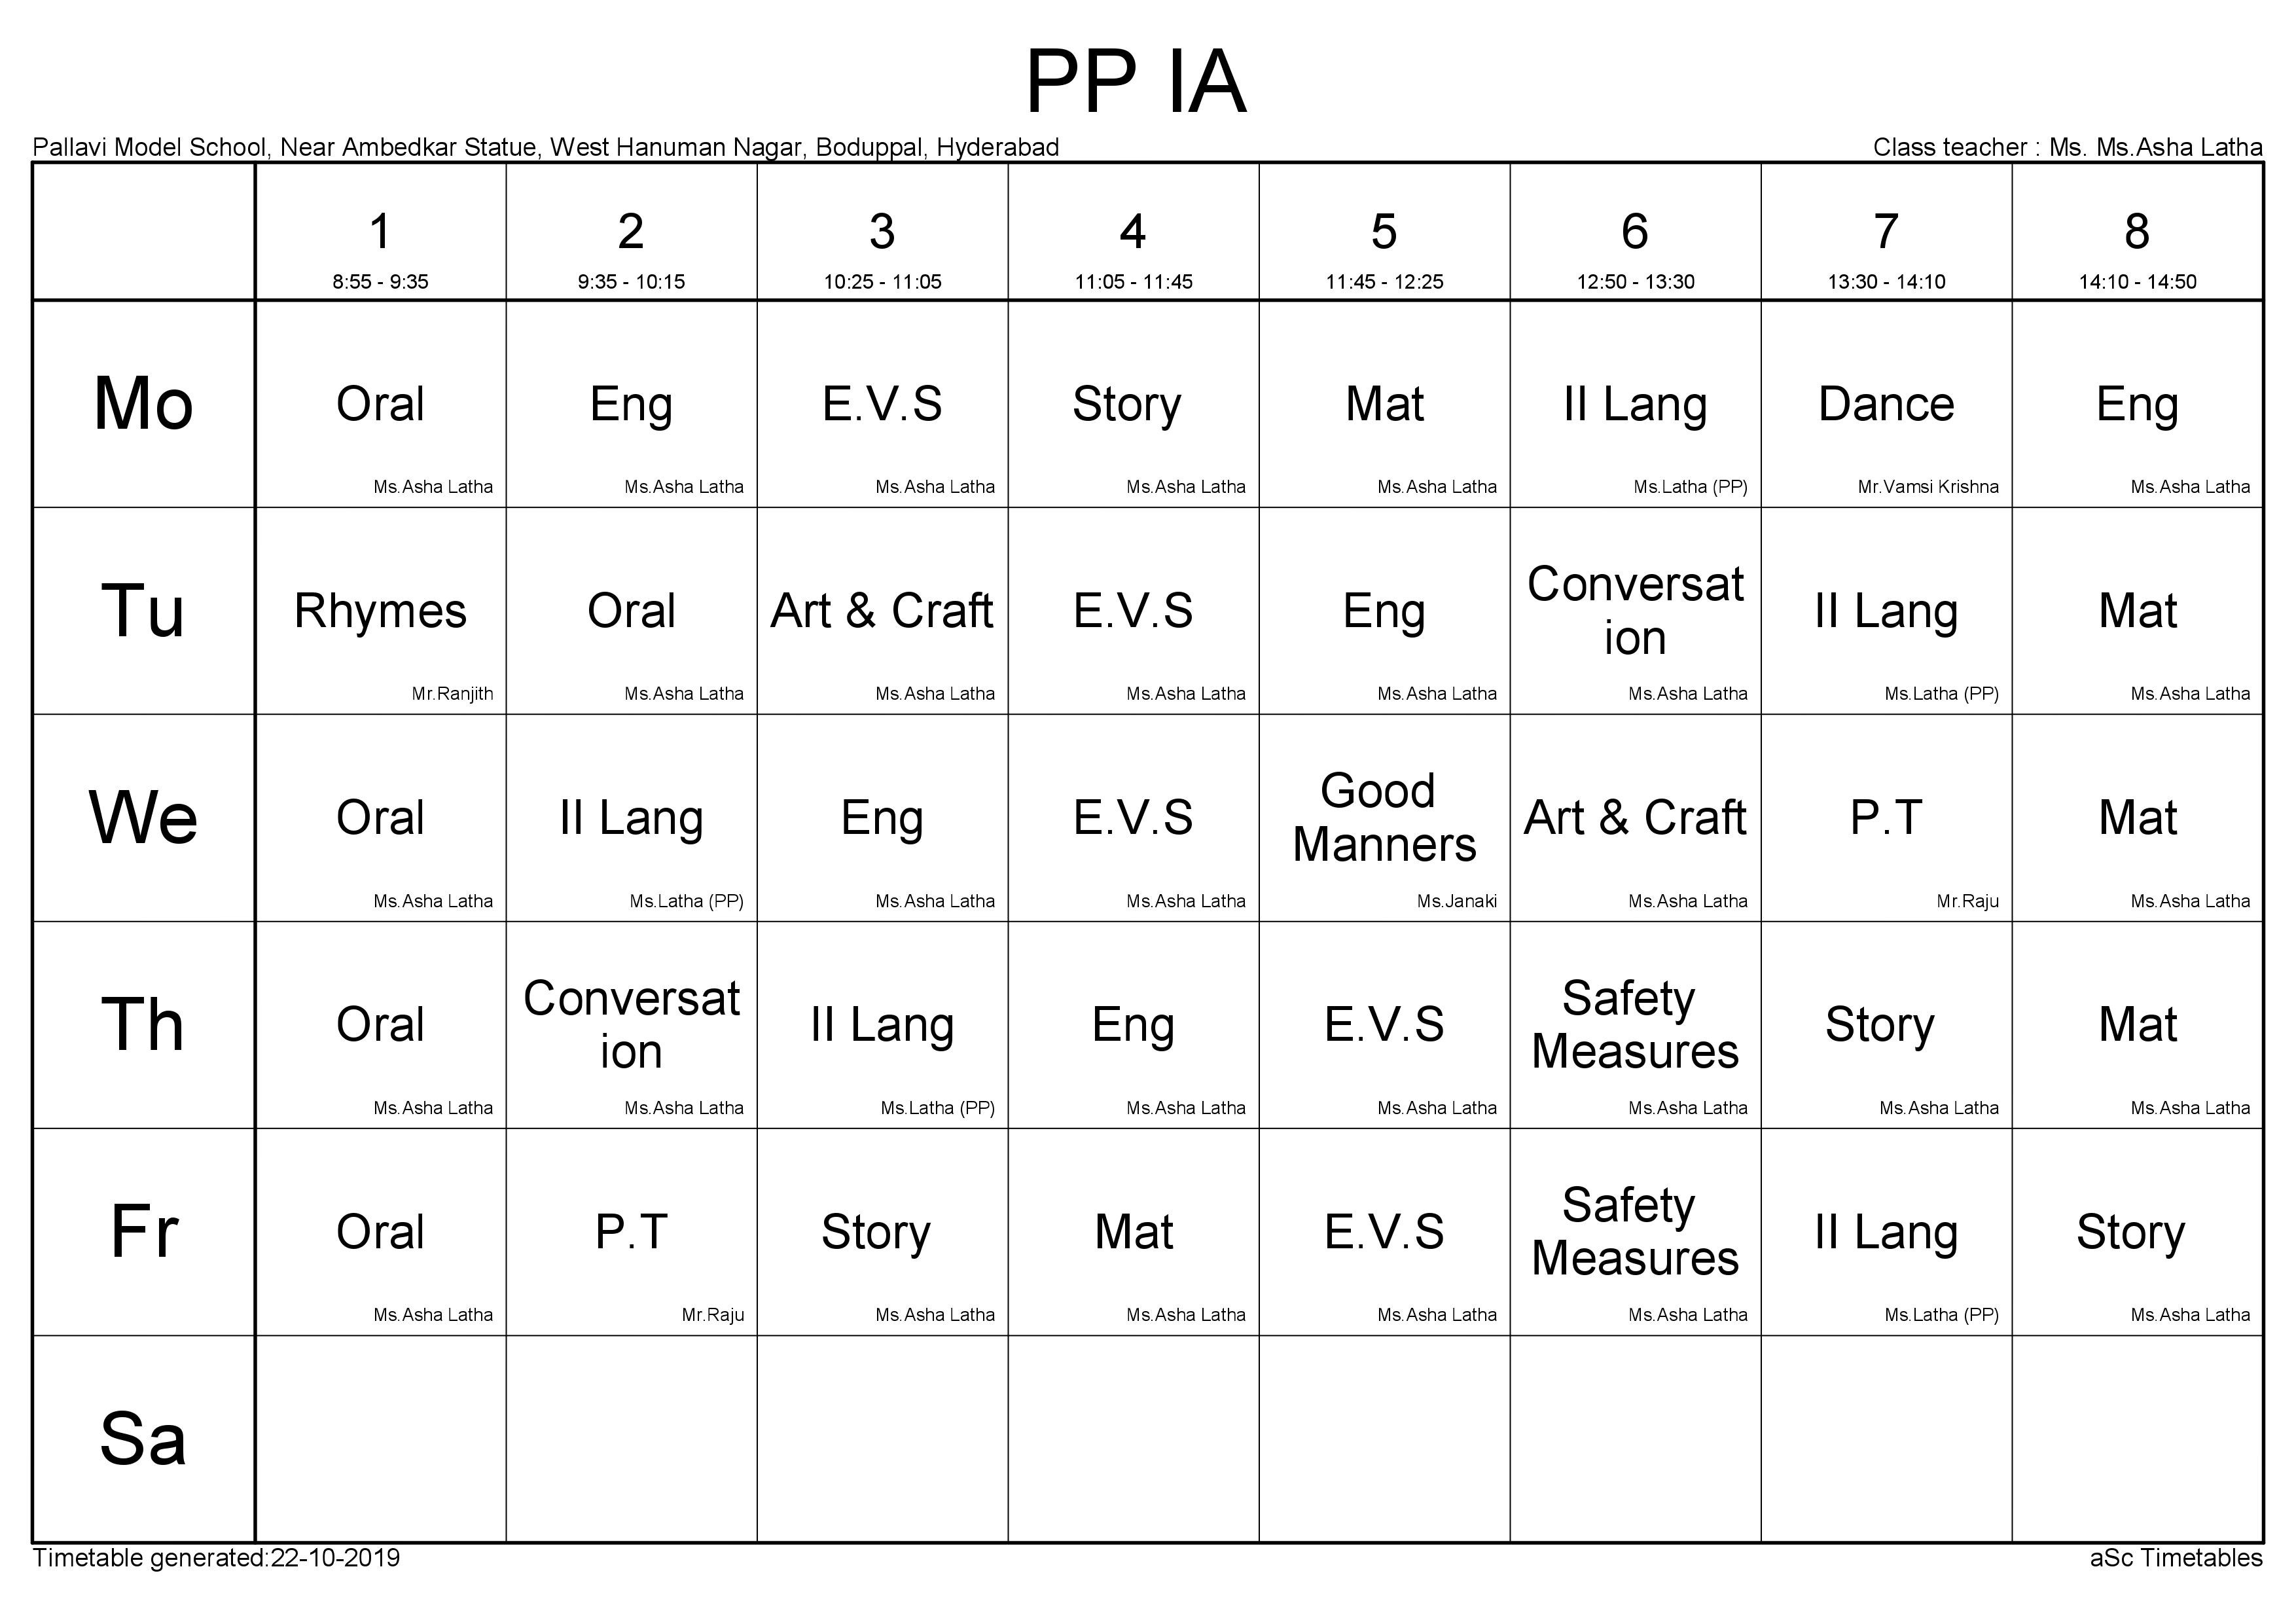 Time Table PP - 1A